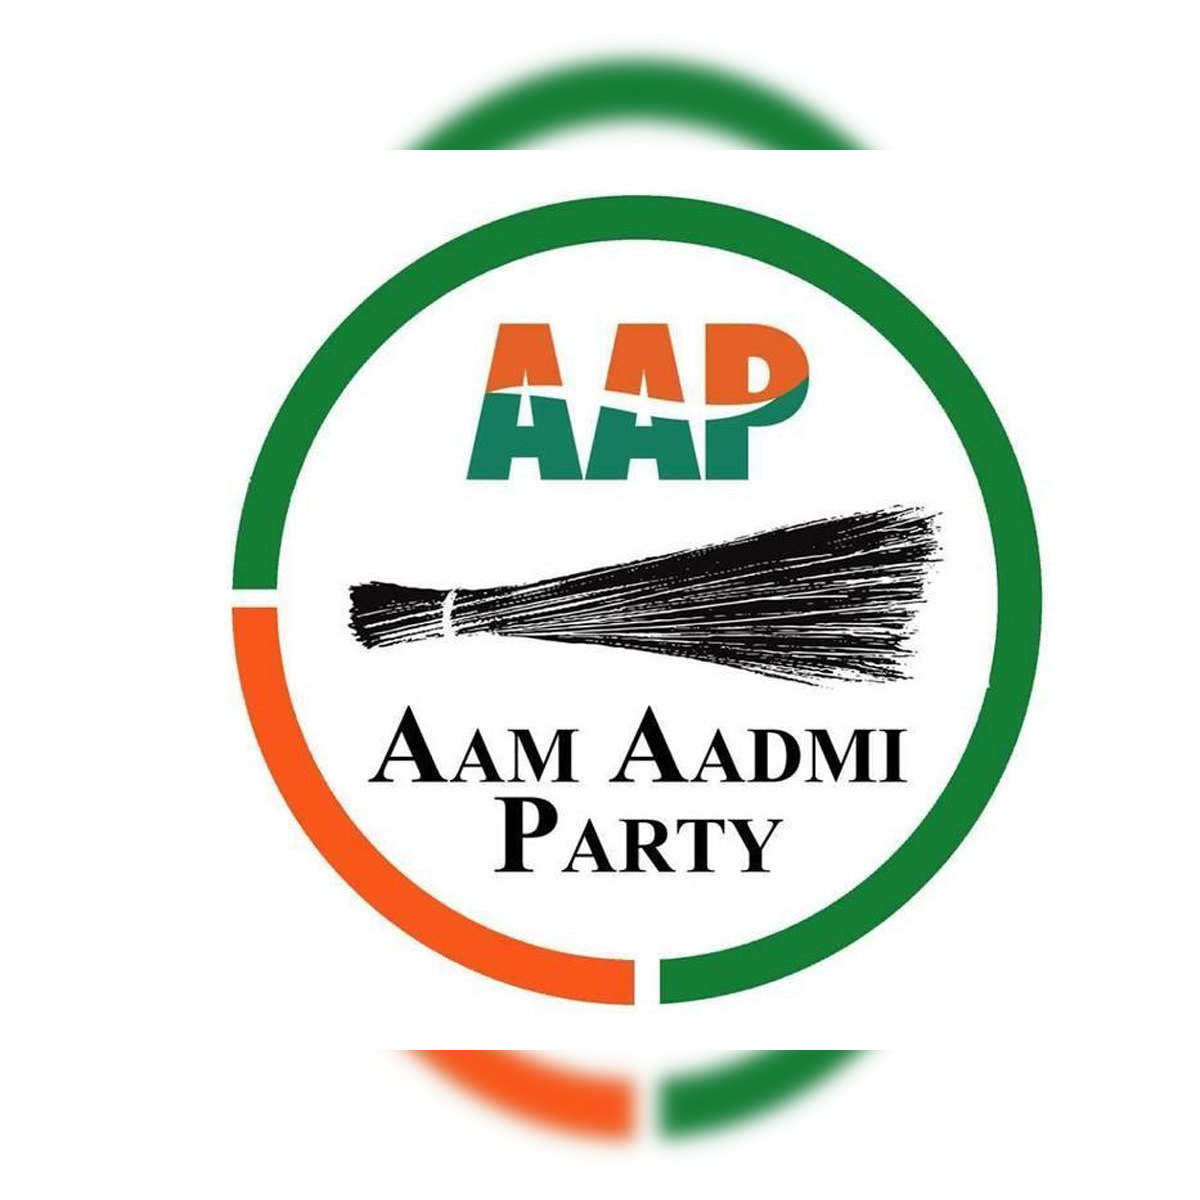 File:Aam Aadmi Party logo (English).svg - Wikimedia Commons